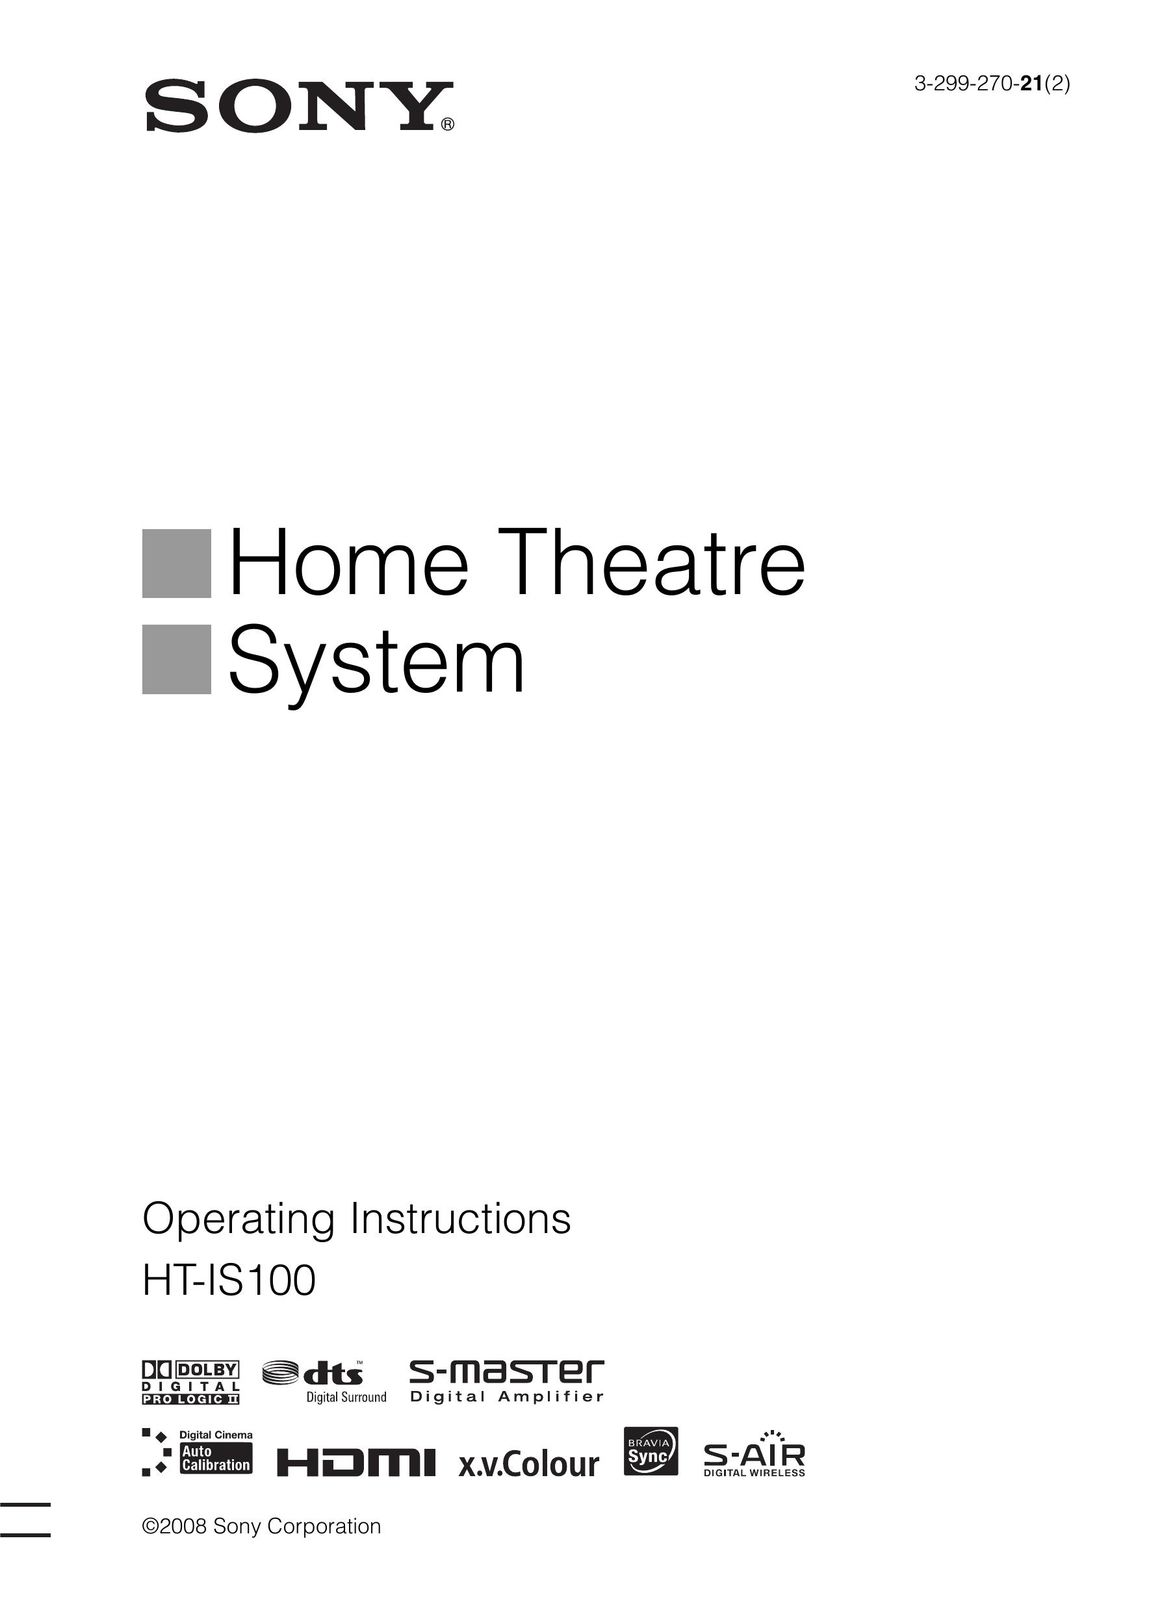 Sony 3-299-270-21(2) Home Theater System User Manual